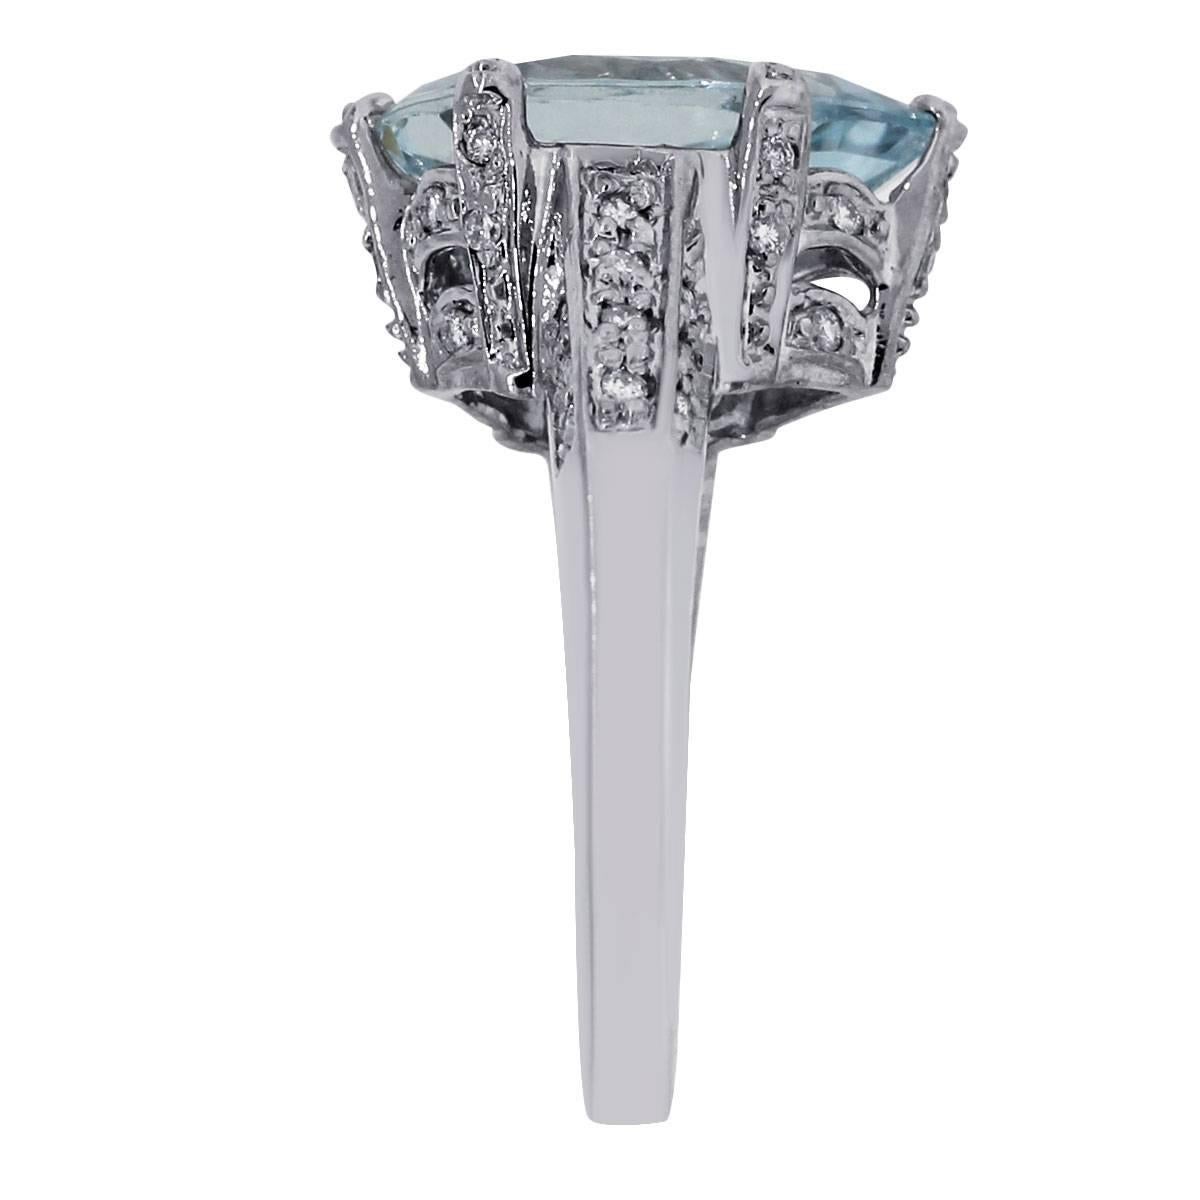 Material: 14k white gold
Diamonds Details: Approximately 0.35ctw round brilliant diamonds. Diamonds are H/I in color and SI in clarity.
Gemstone Details: Approximately 4.62ct pear shape aquamarine gemstone
Measurements: 0.85″ x 0.66″ x 1.10″
Ring